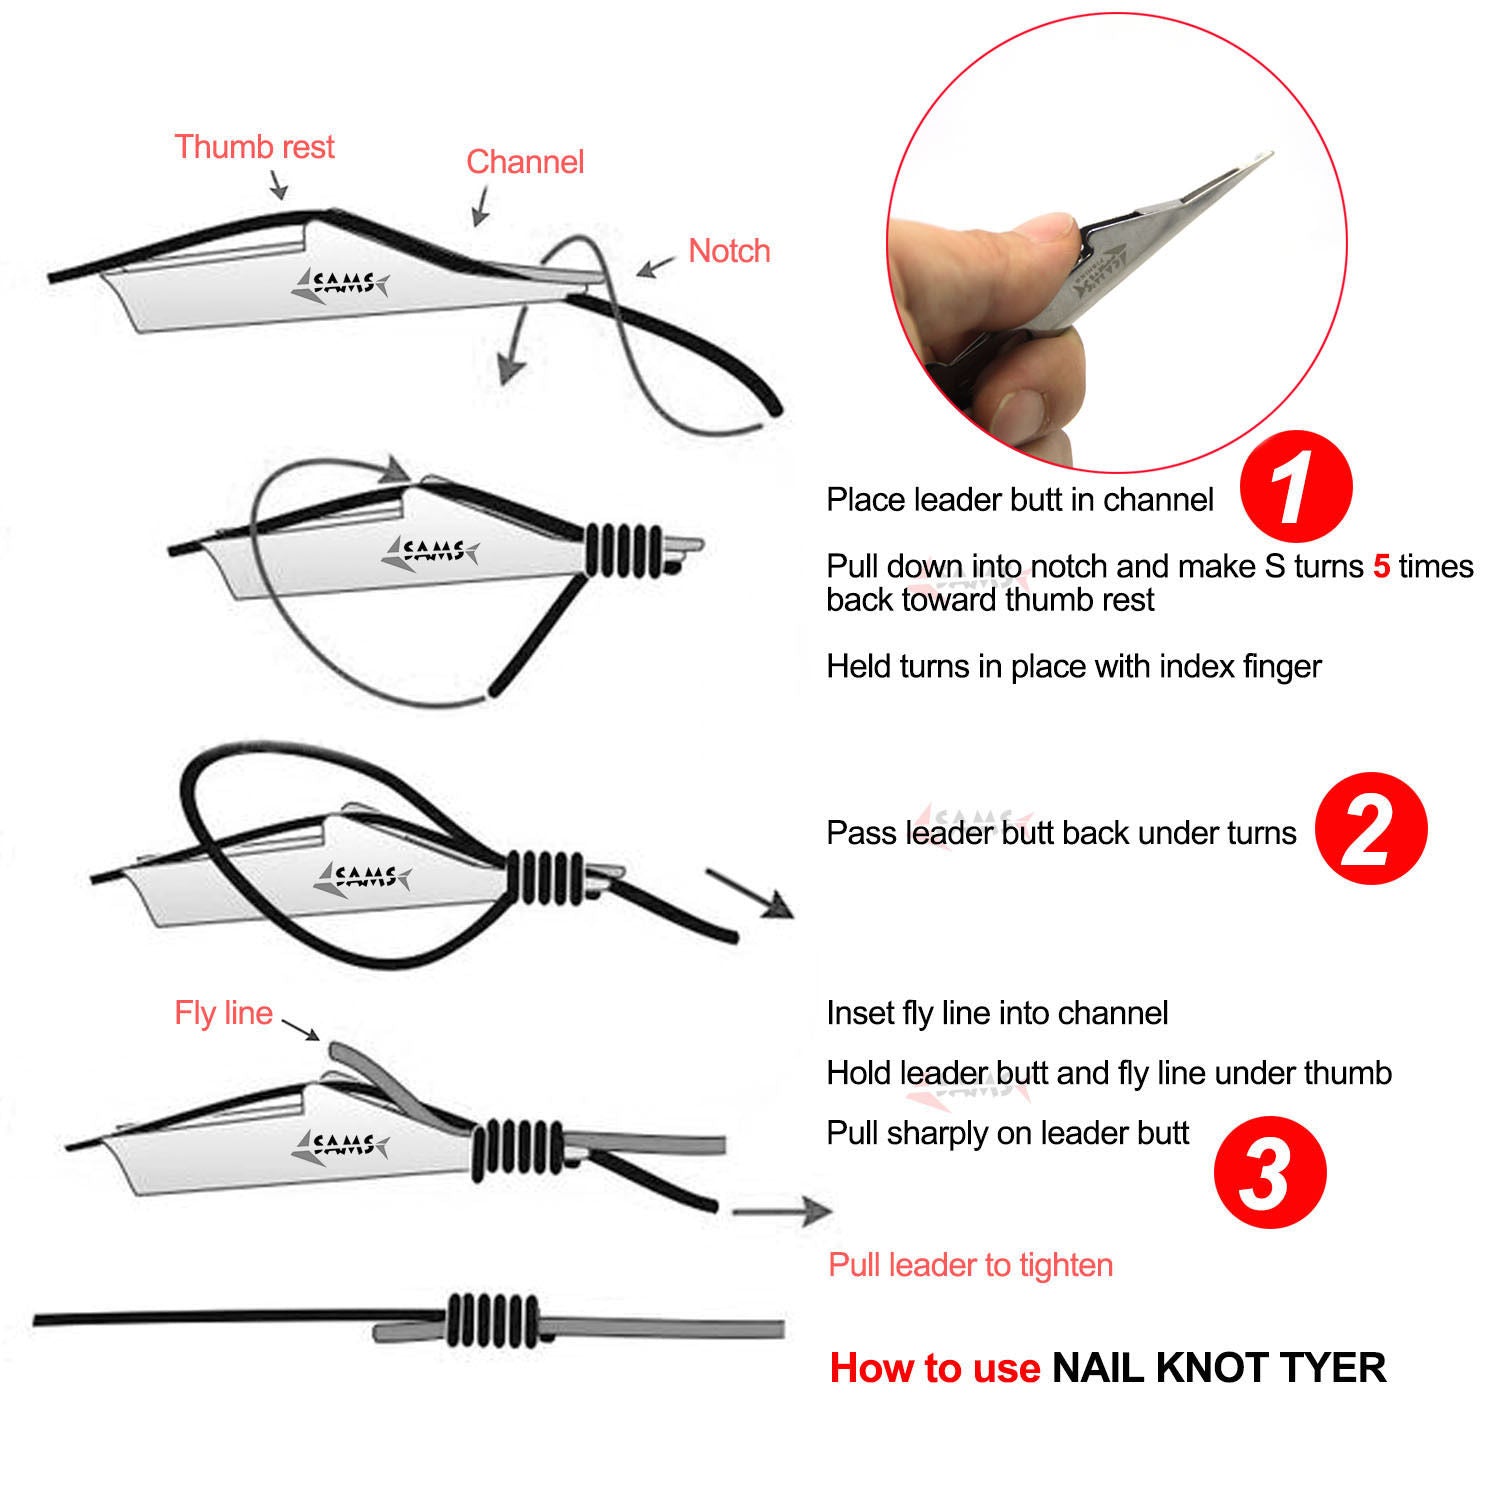 Knot Tyer Nail Knot animated, illustrated and described